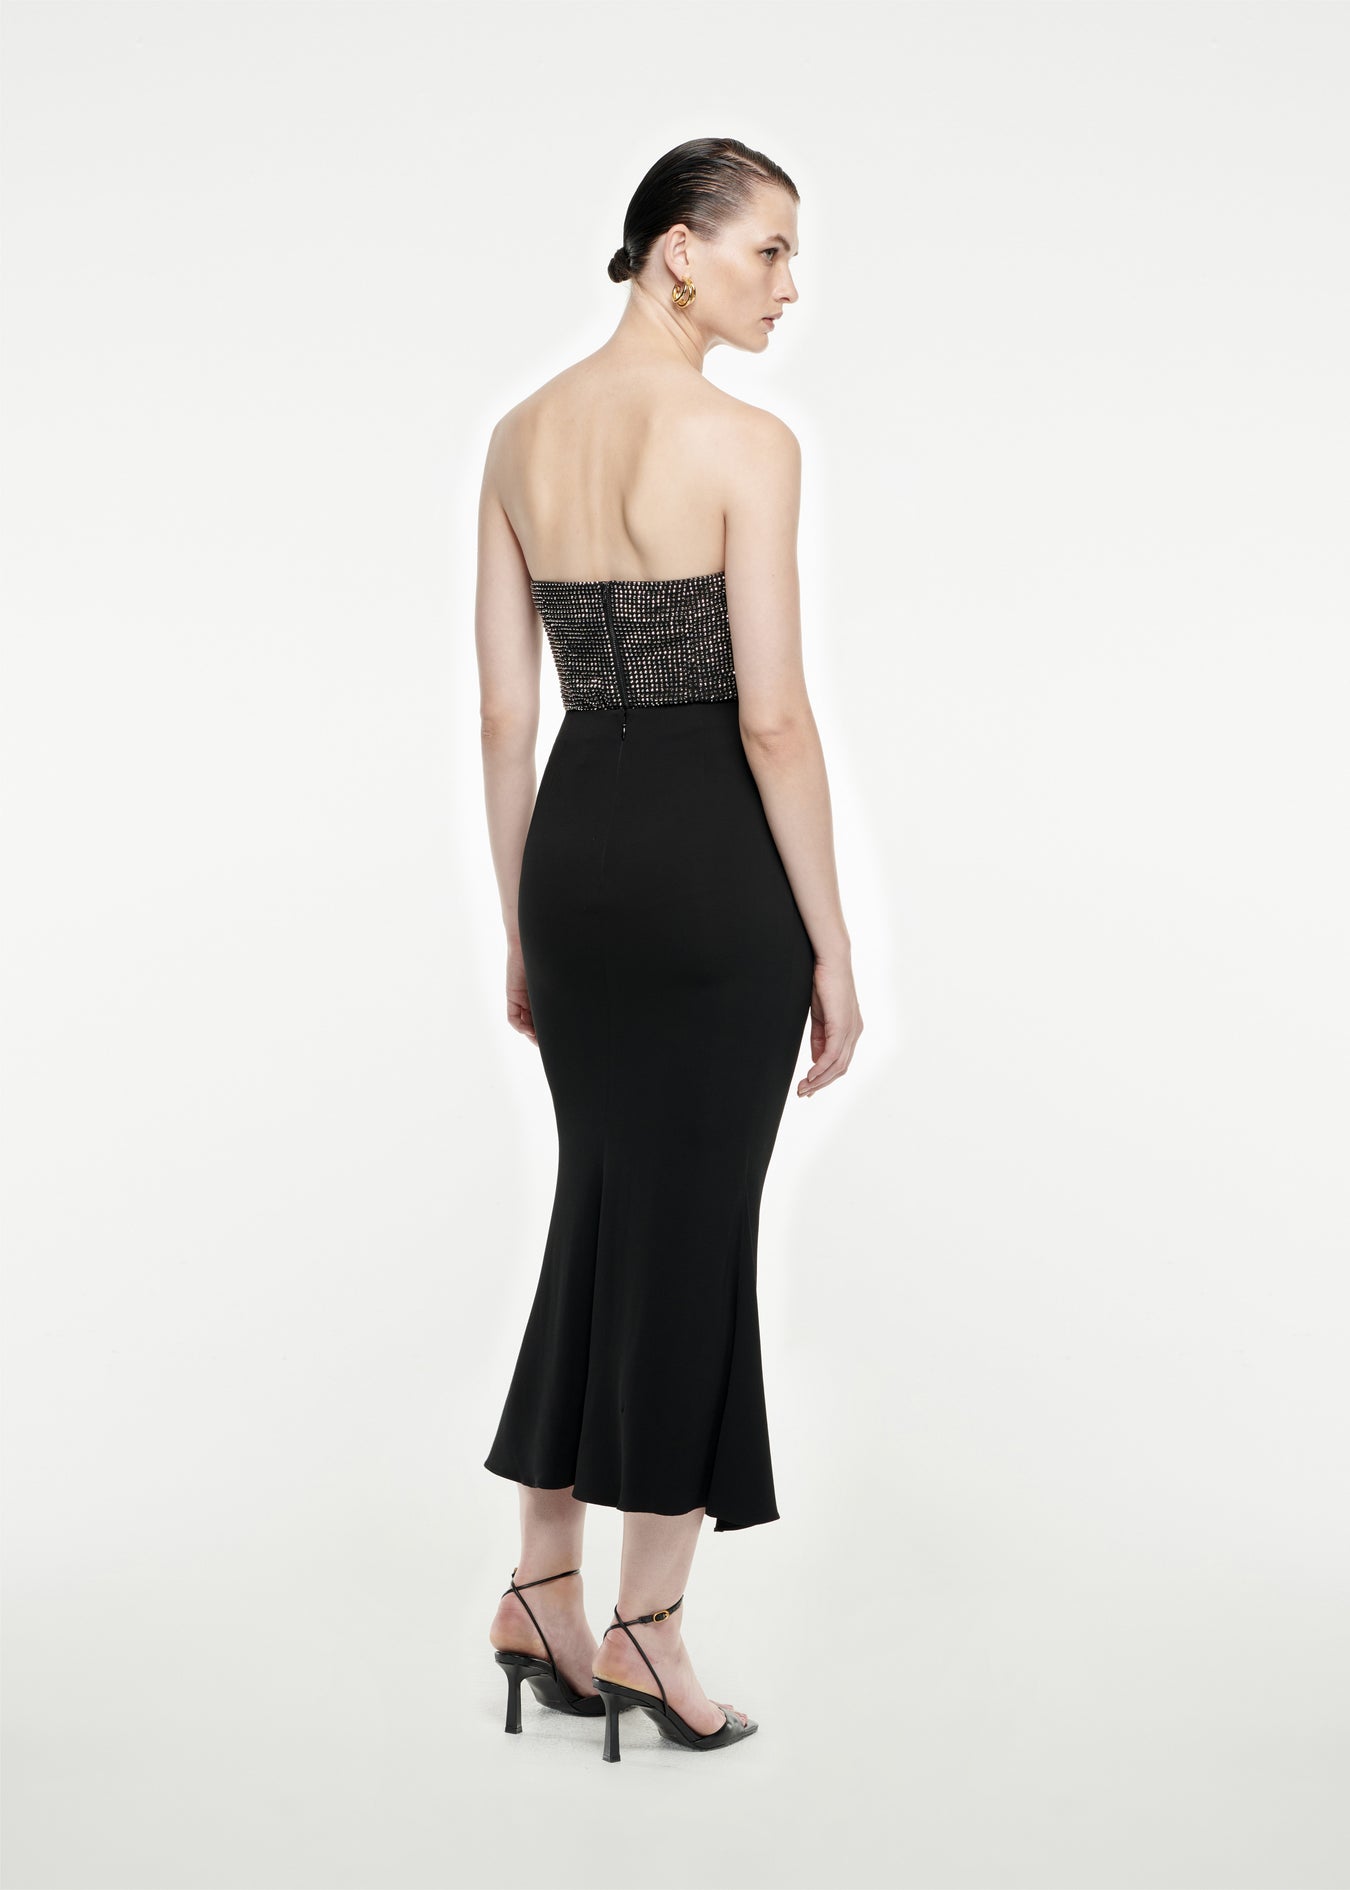 The back of a woman wearing the Strapless Diamante Top in Black